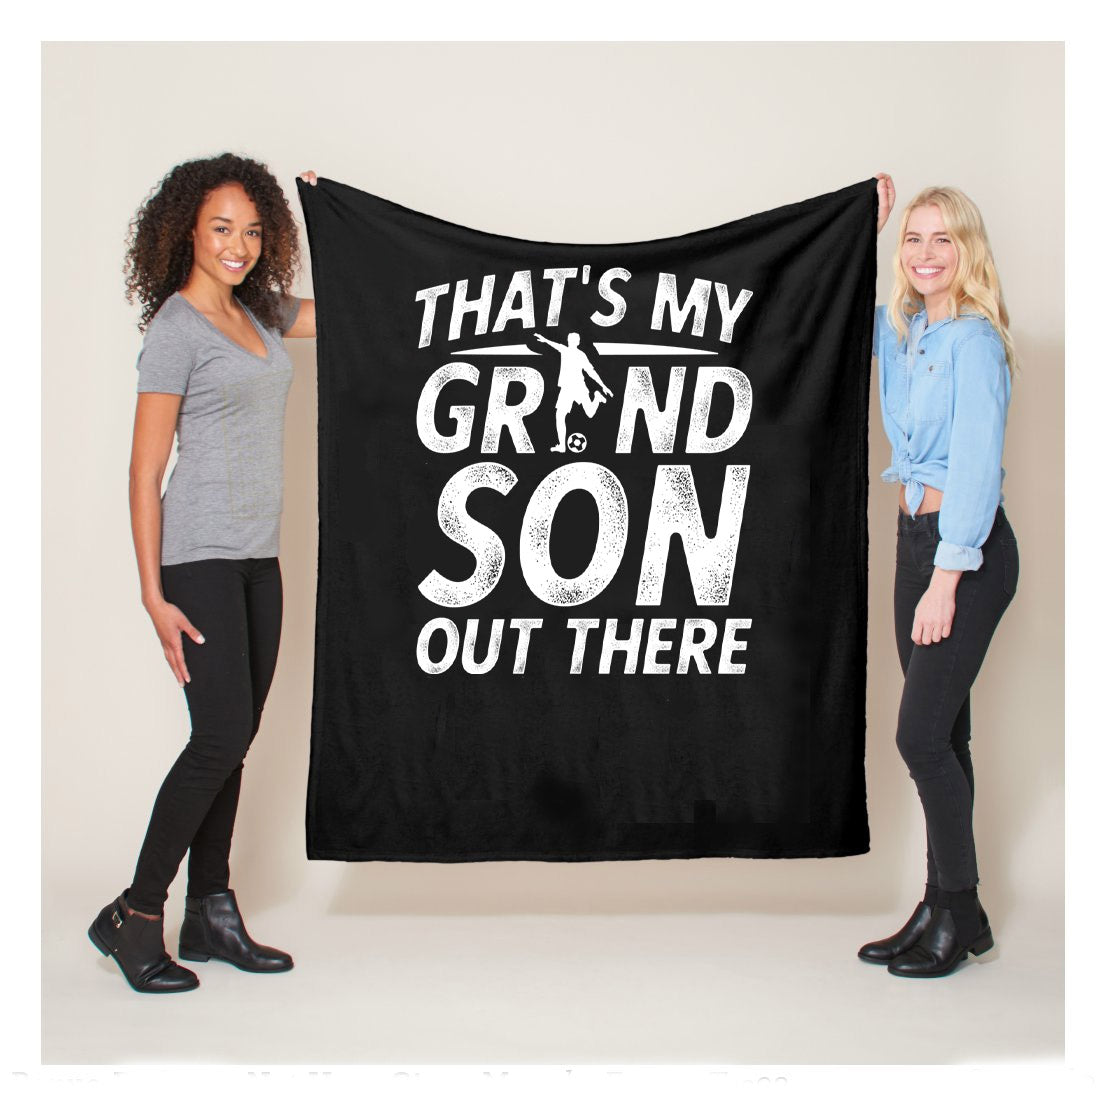 Thats My Grandson Out There Soccer Sherpa Blanket,  Soccer Blankets, Soccer Gifts, Happy Fathers Day Gift Ideas For Grandpa